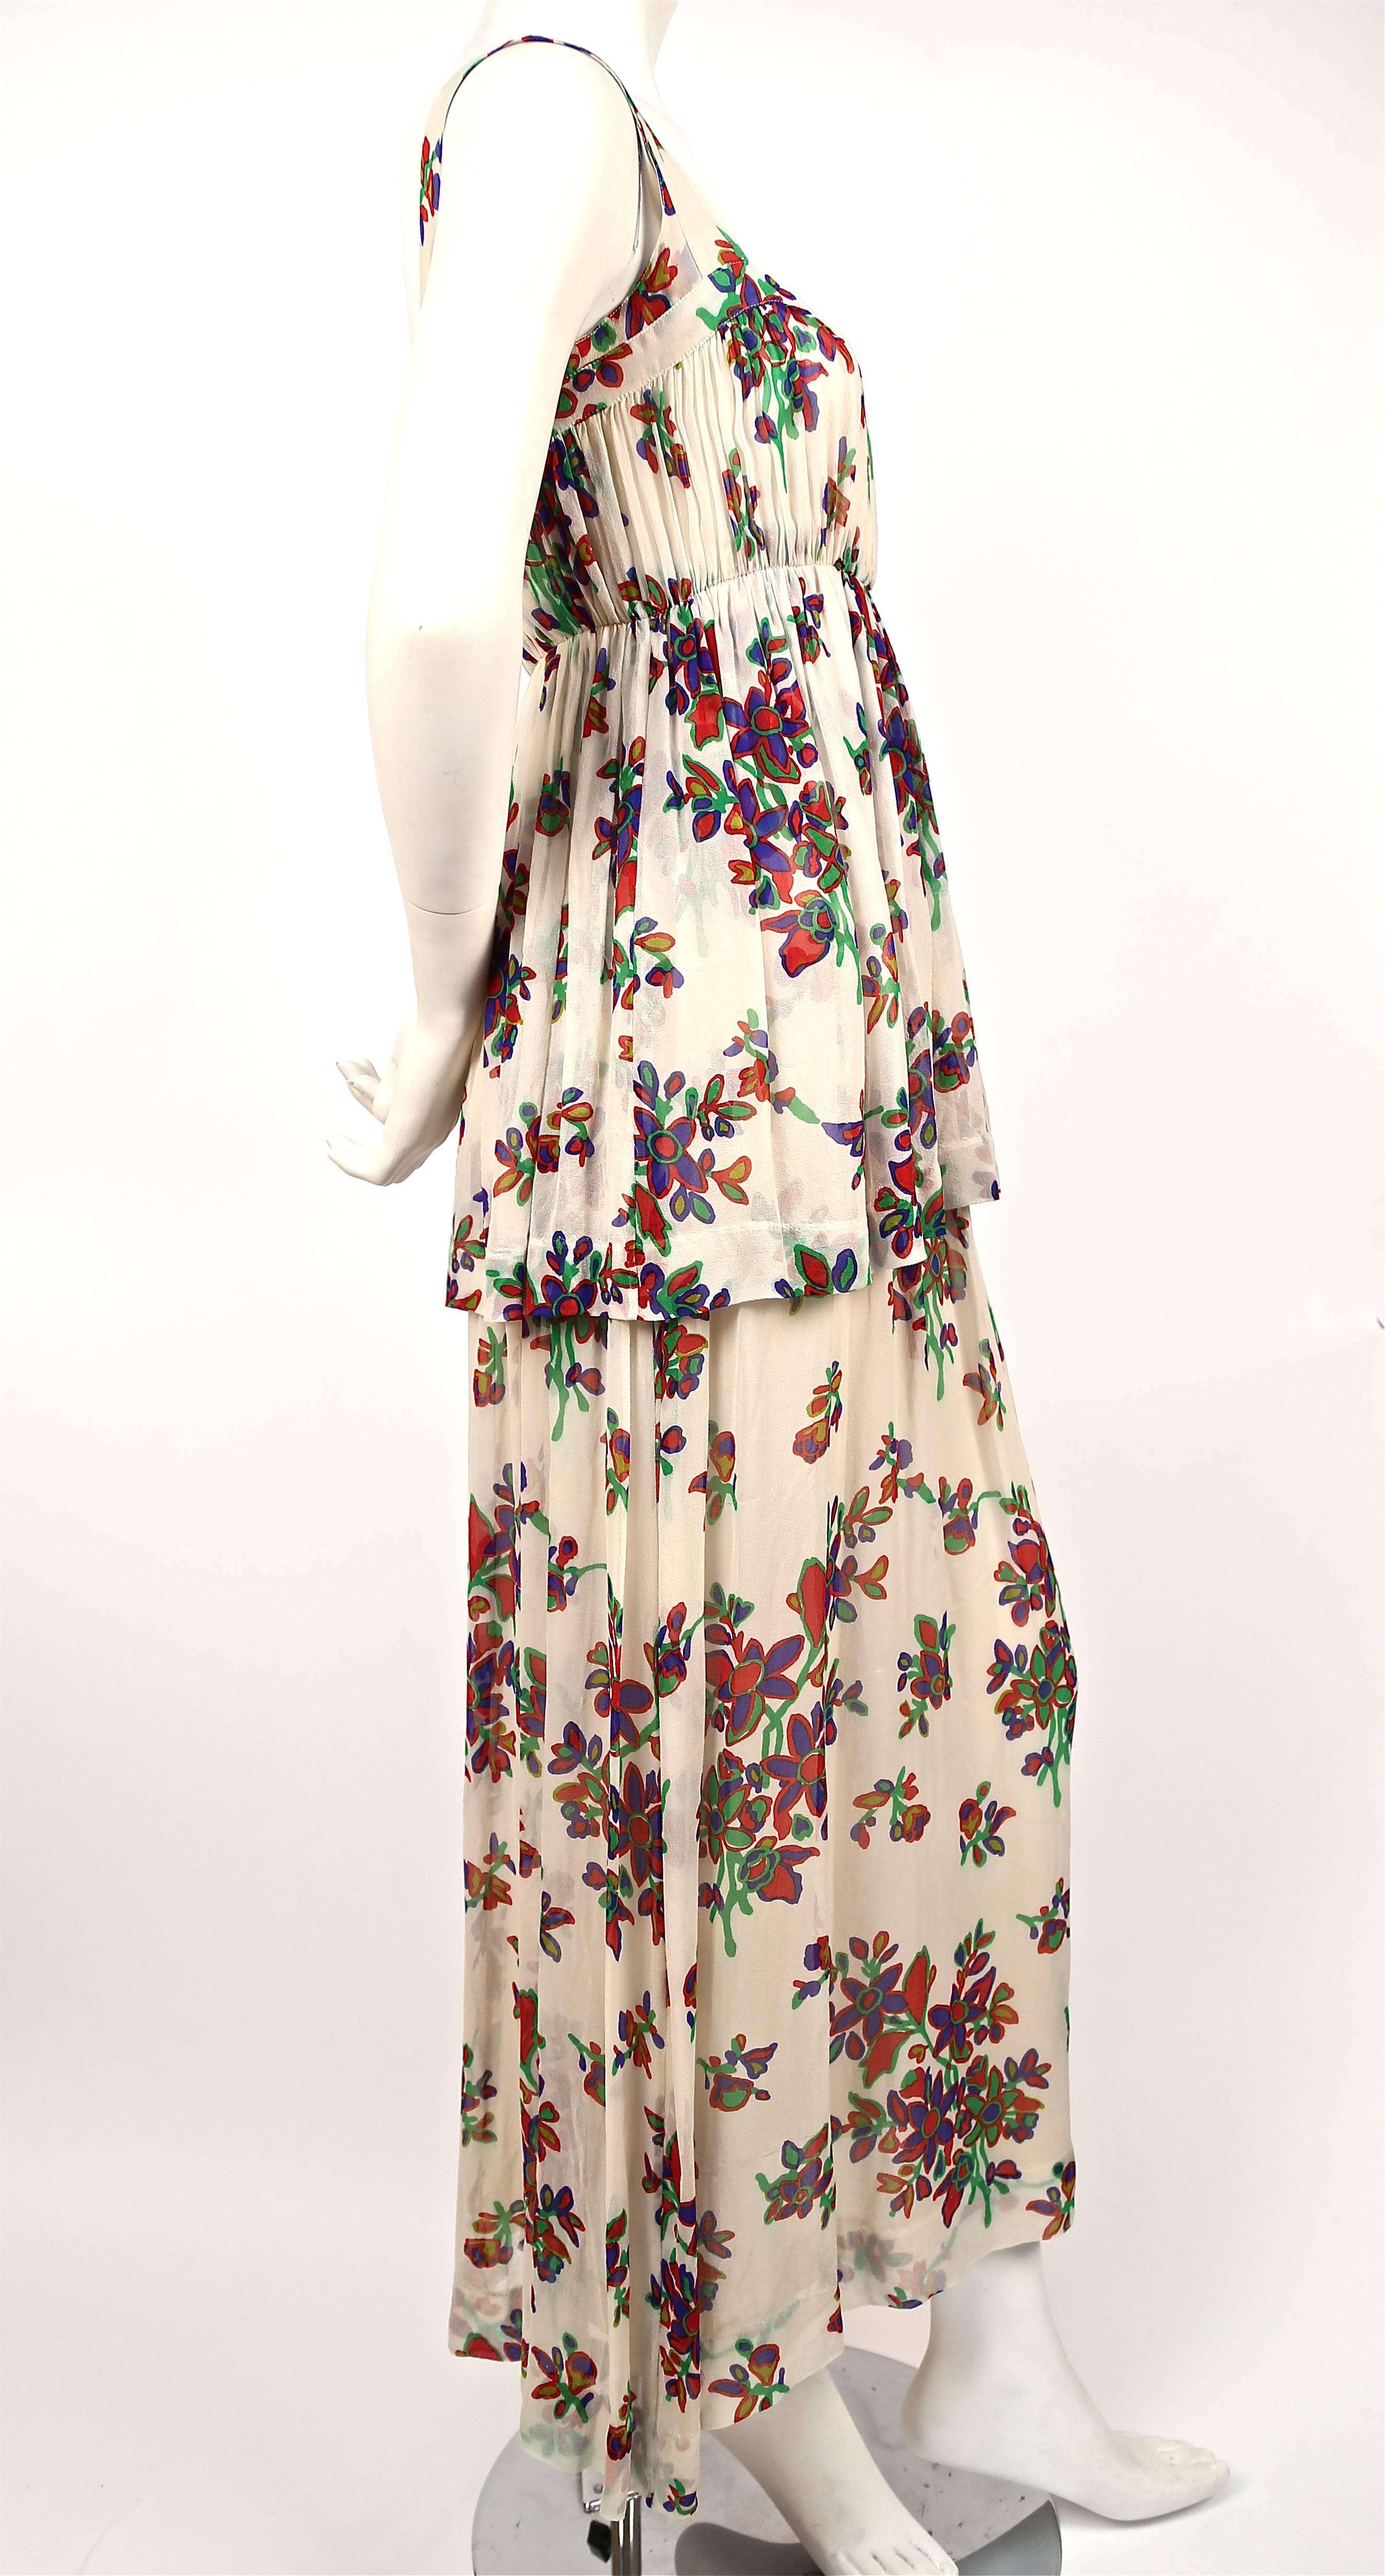 Delicate floral silk chiffon summer dress designed by Yves Saint Laurent dating to the 1970s. Best fits a size 4 or 6. Approximate measurements: bust 32-33", waist 26.5-27" and length 53-54". Fully lined in cream silk. Zips up center